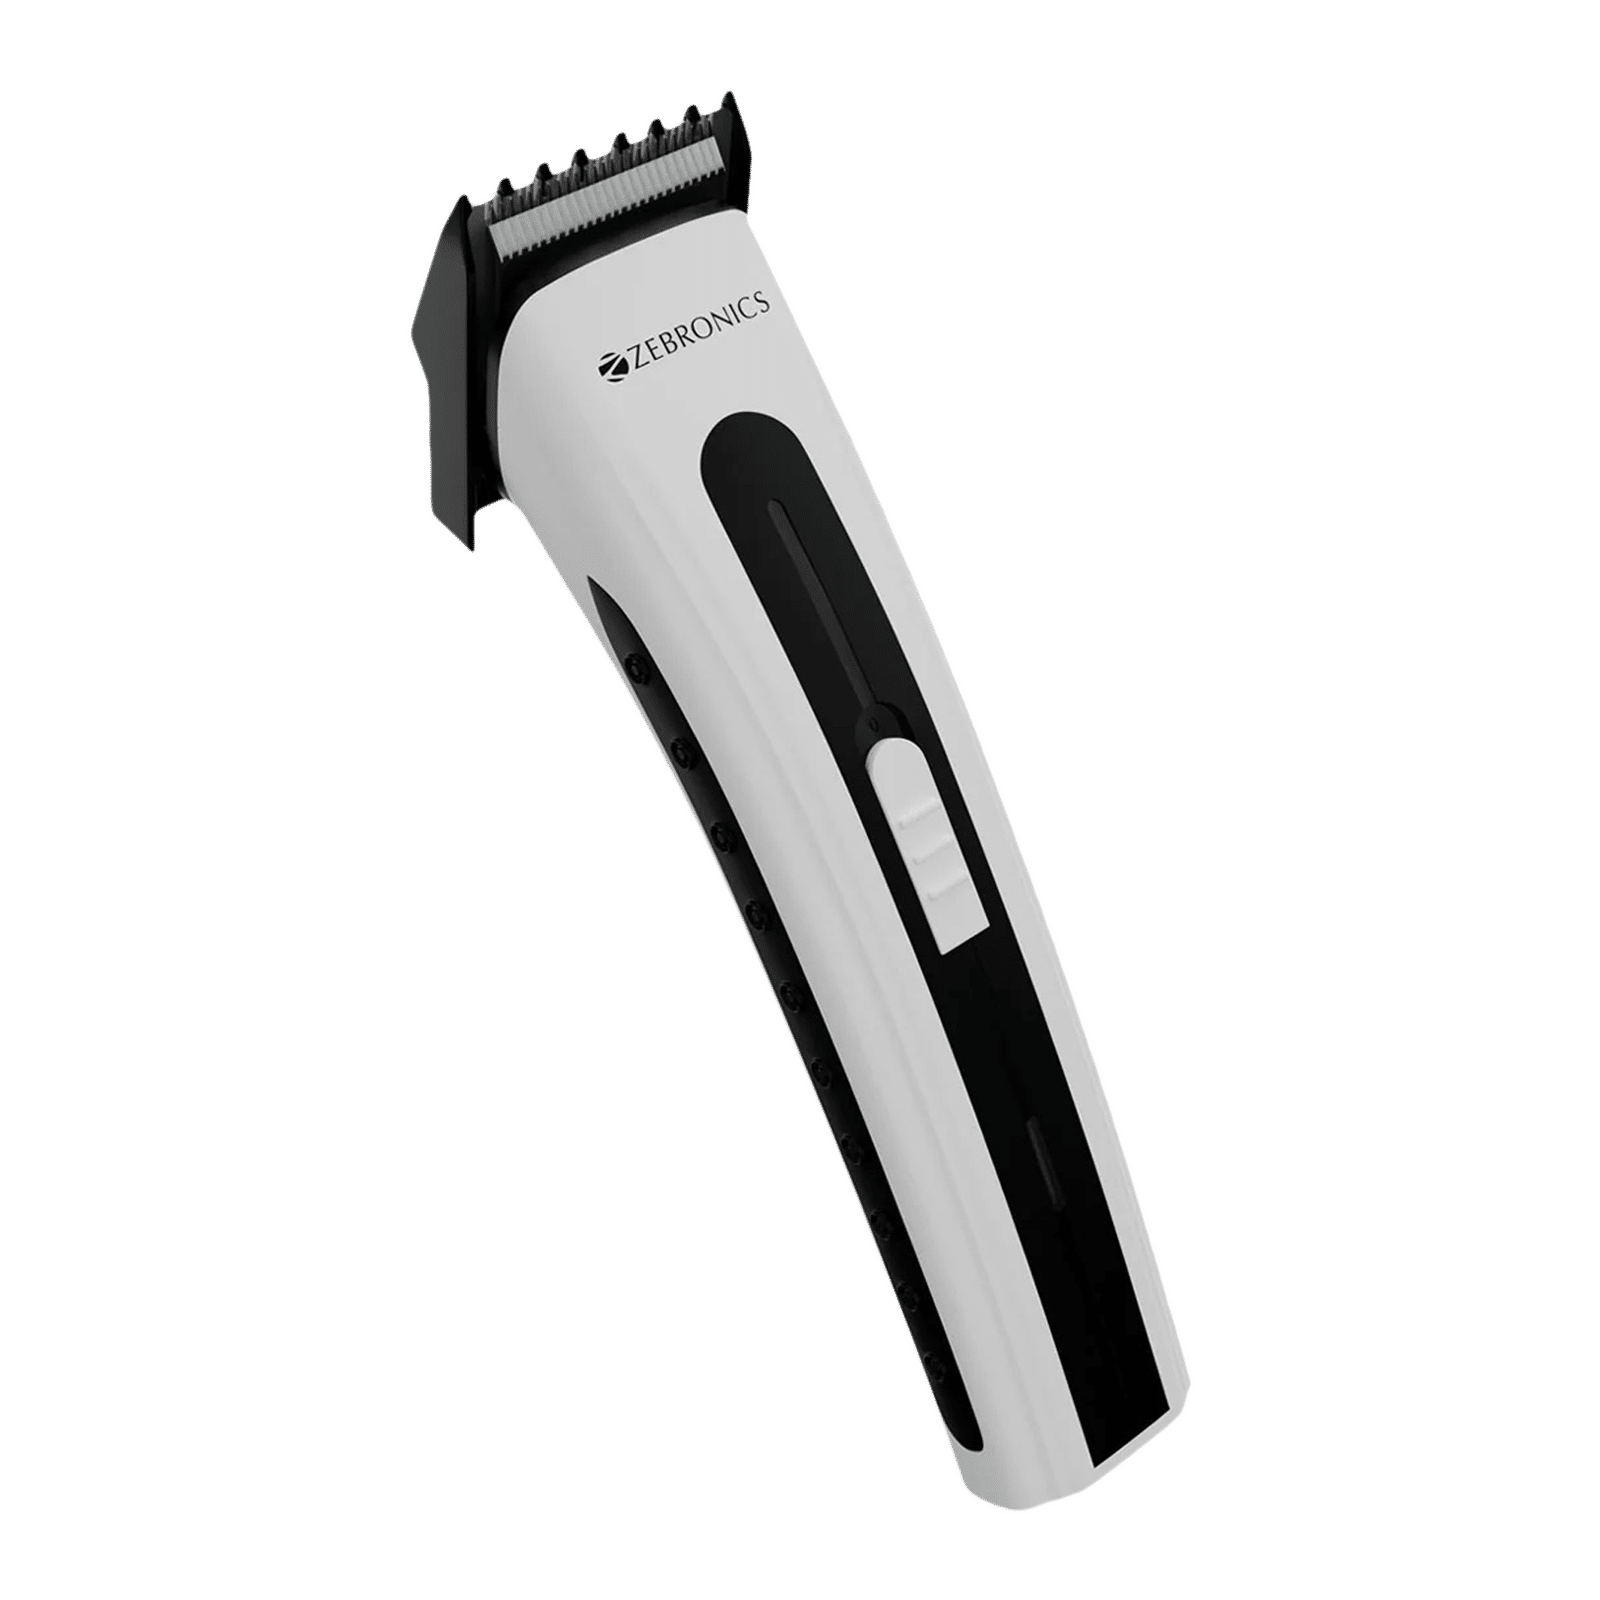 ZEBRONICS ZEB-HT51 Cordless Dry Trimmer for Beard and Moustache with 3 Length Settings for Men (45mins Runtime, Adjustable Trimming Range, White and Black)